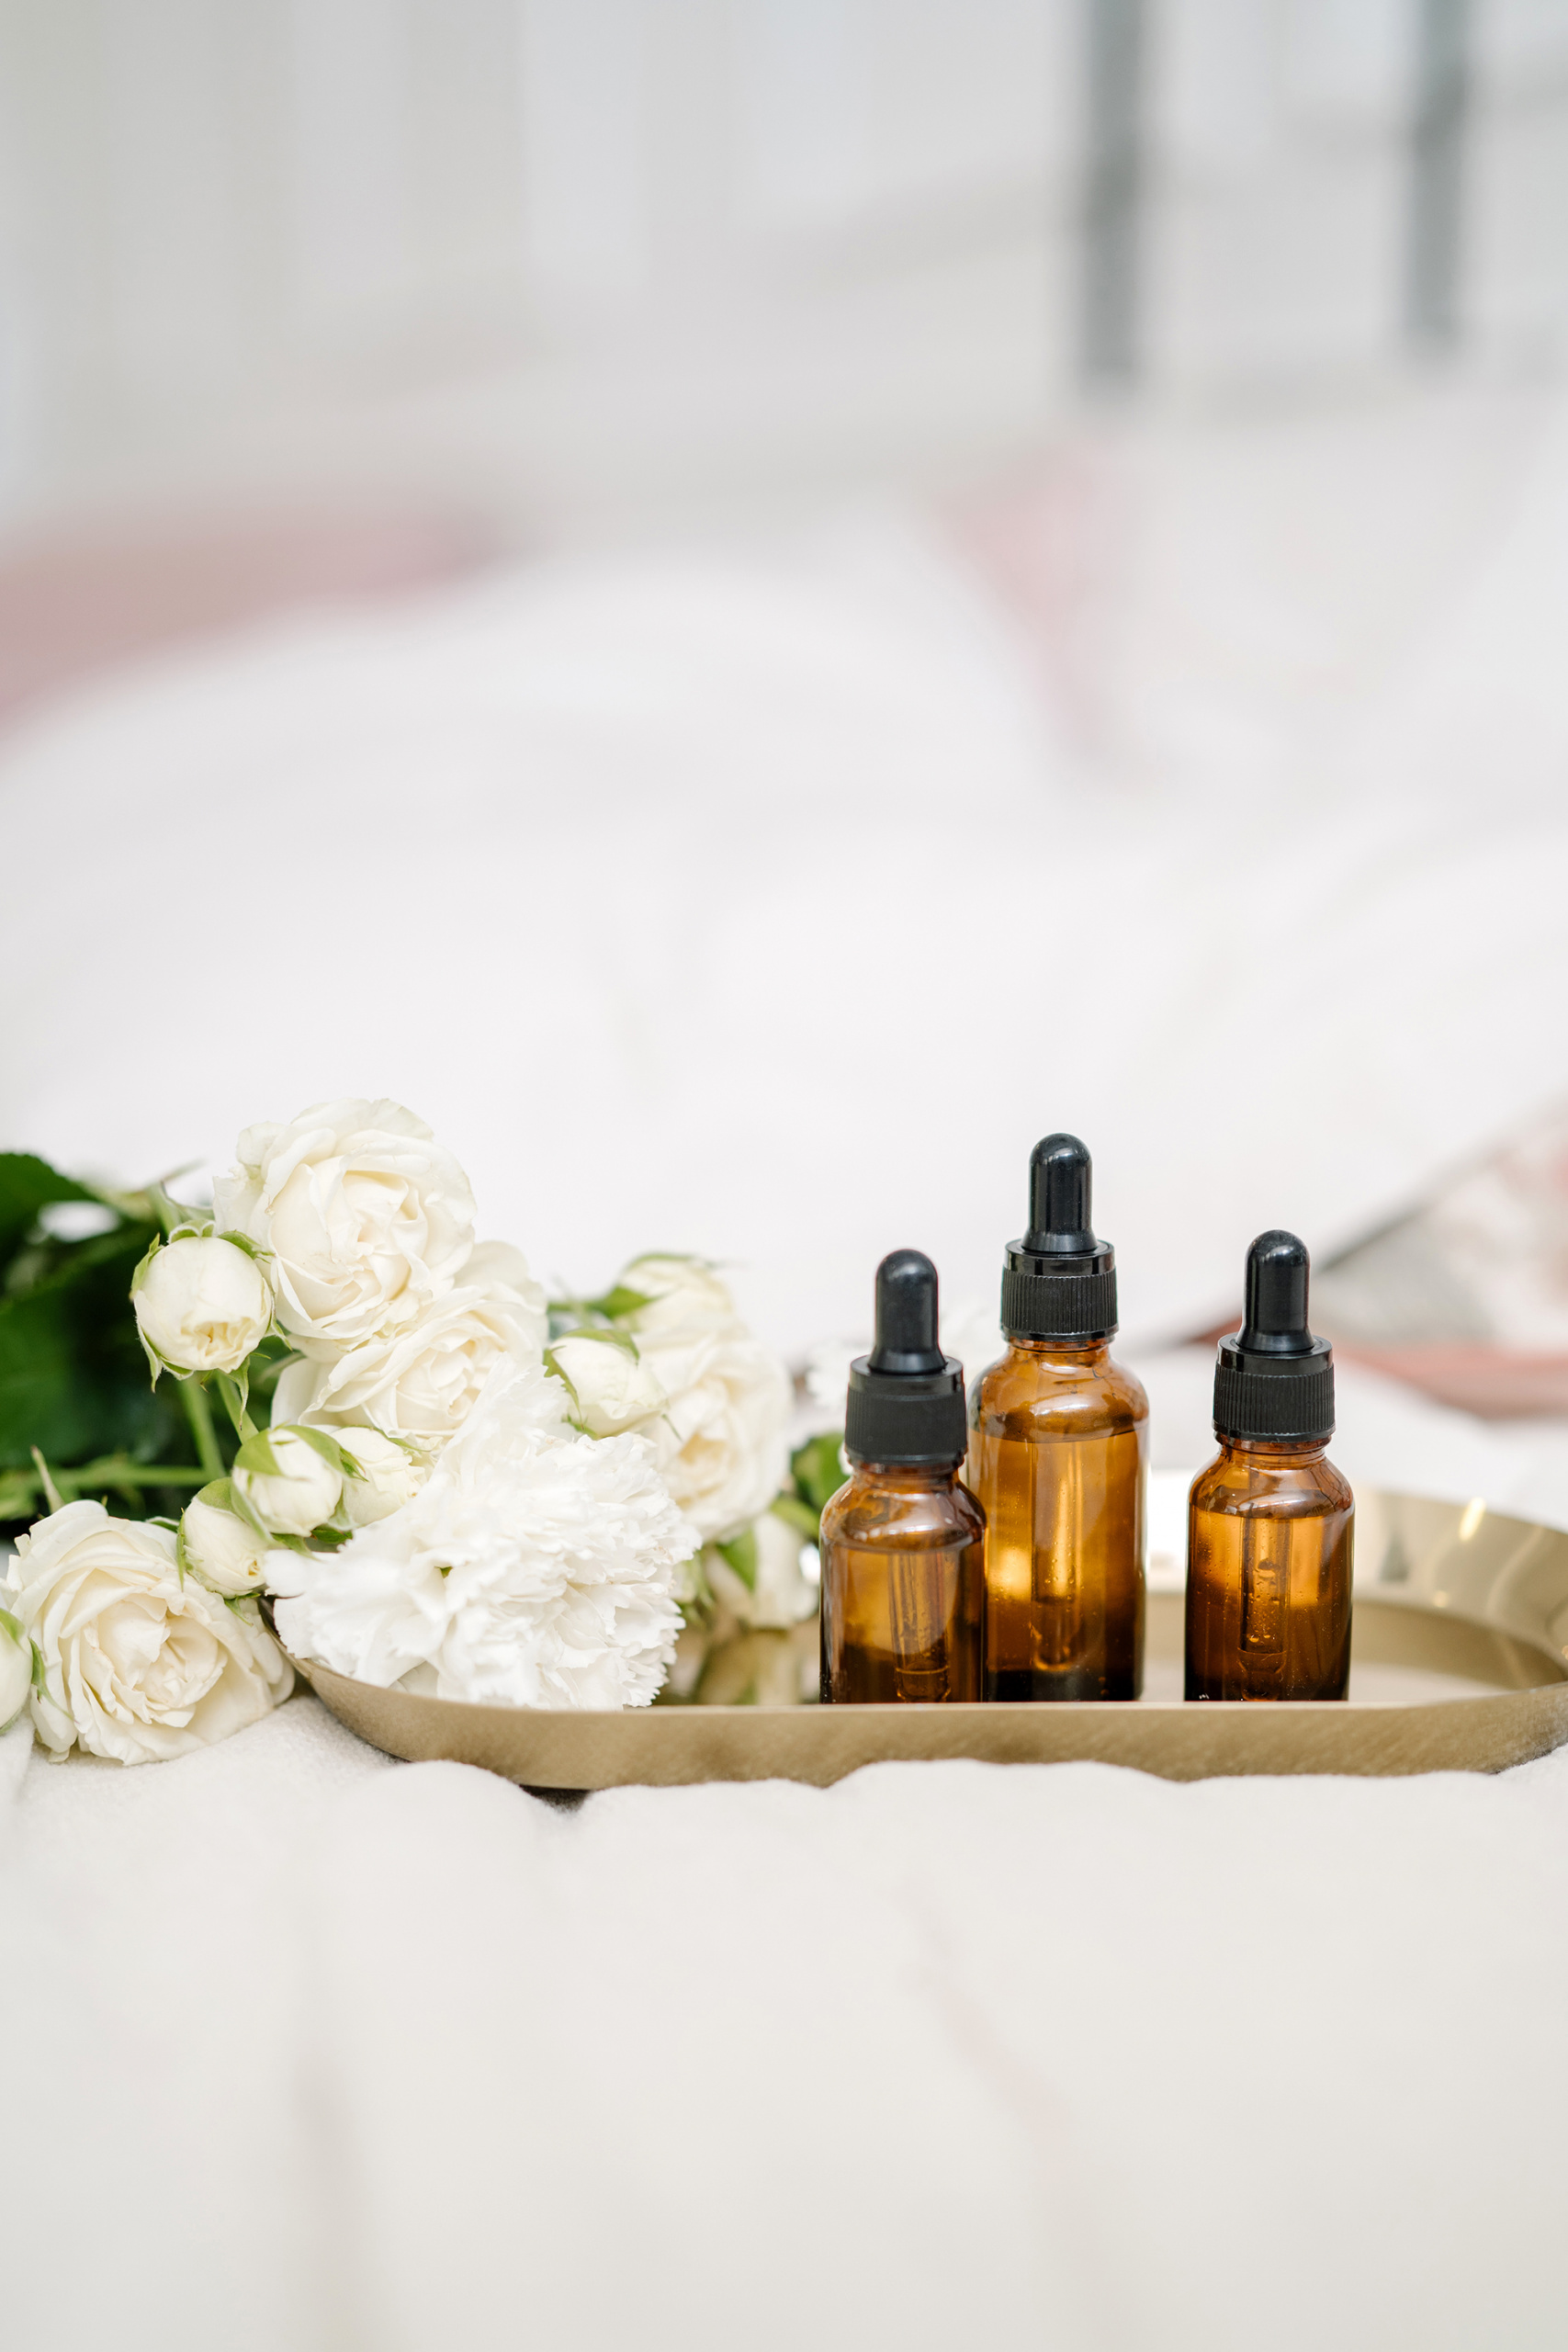 vitamin c serums, beauty tray with white flowers and serum bottles